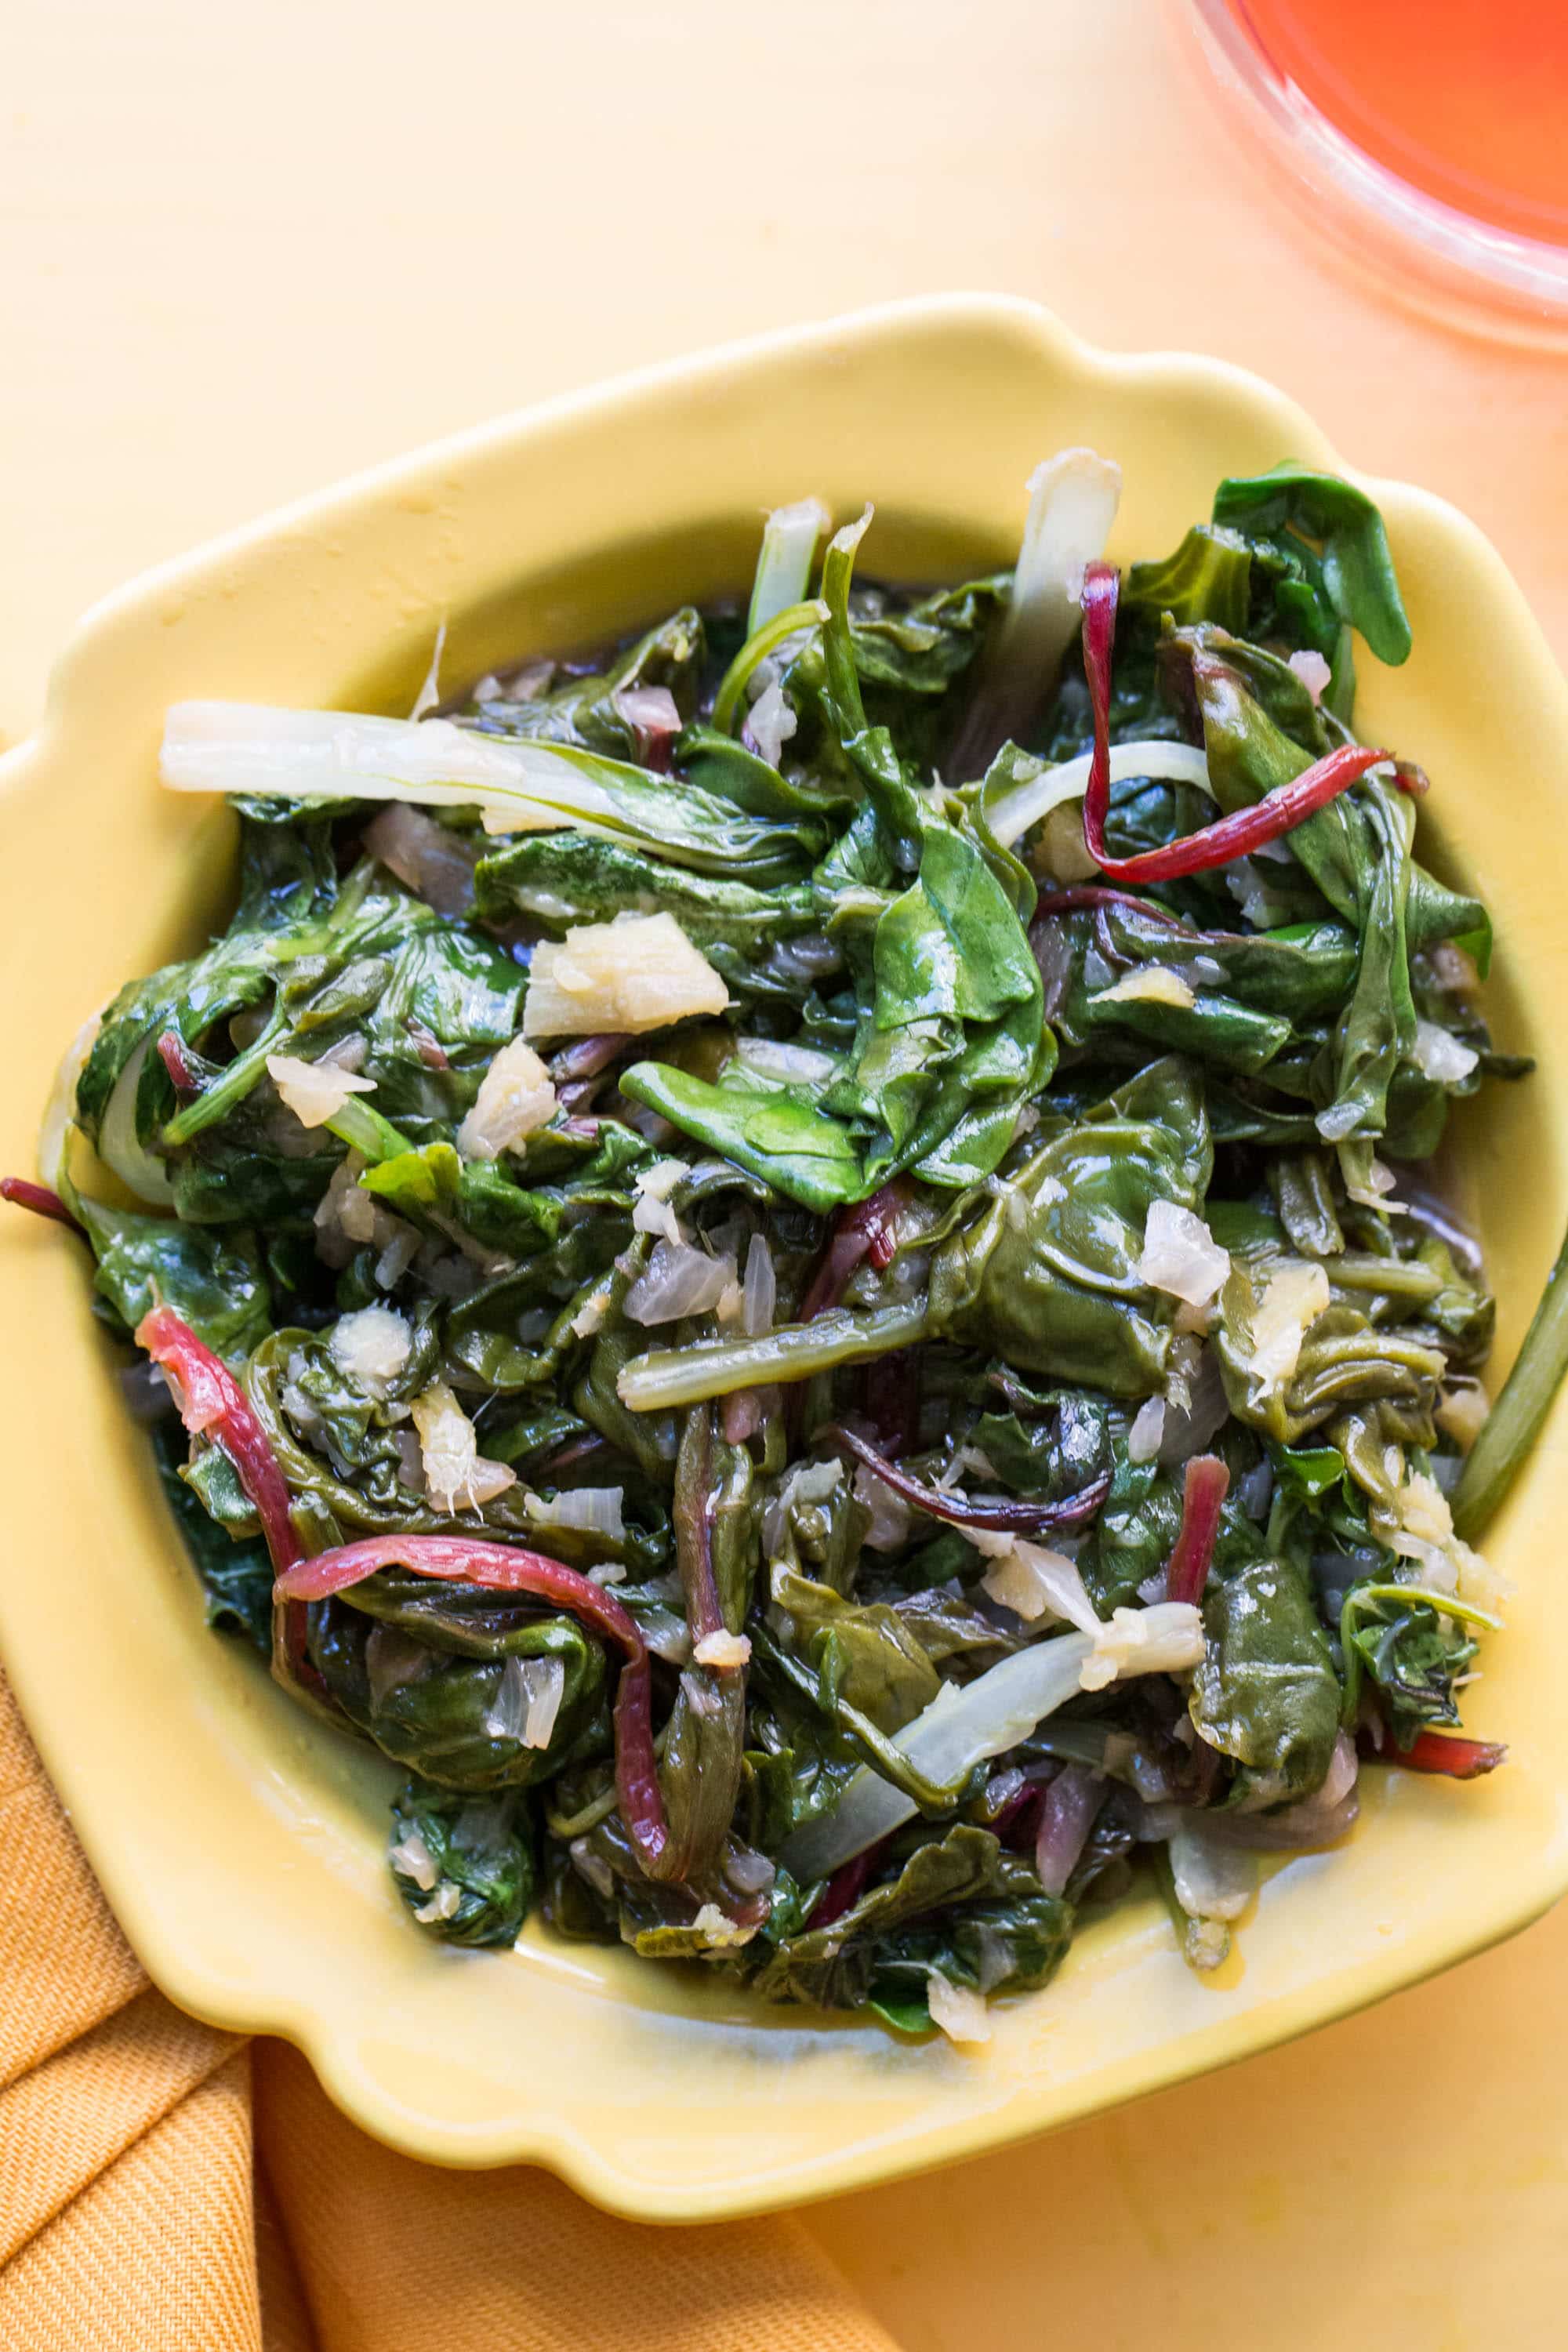 Spicy Asian greens in yellow bowl on table.